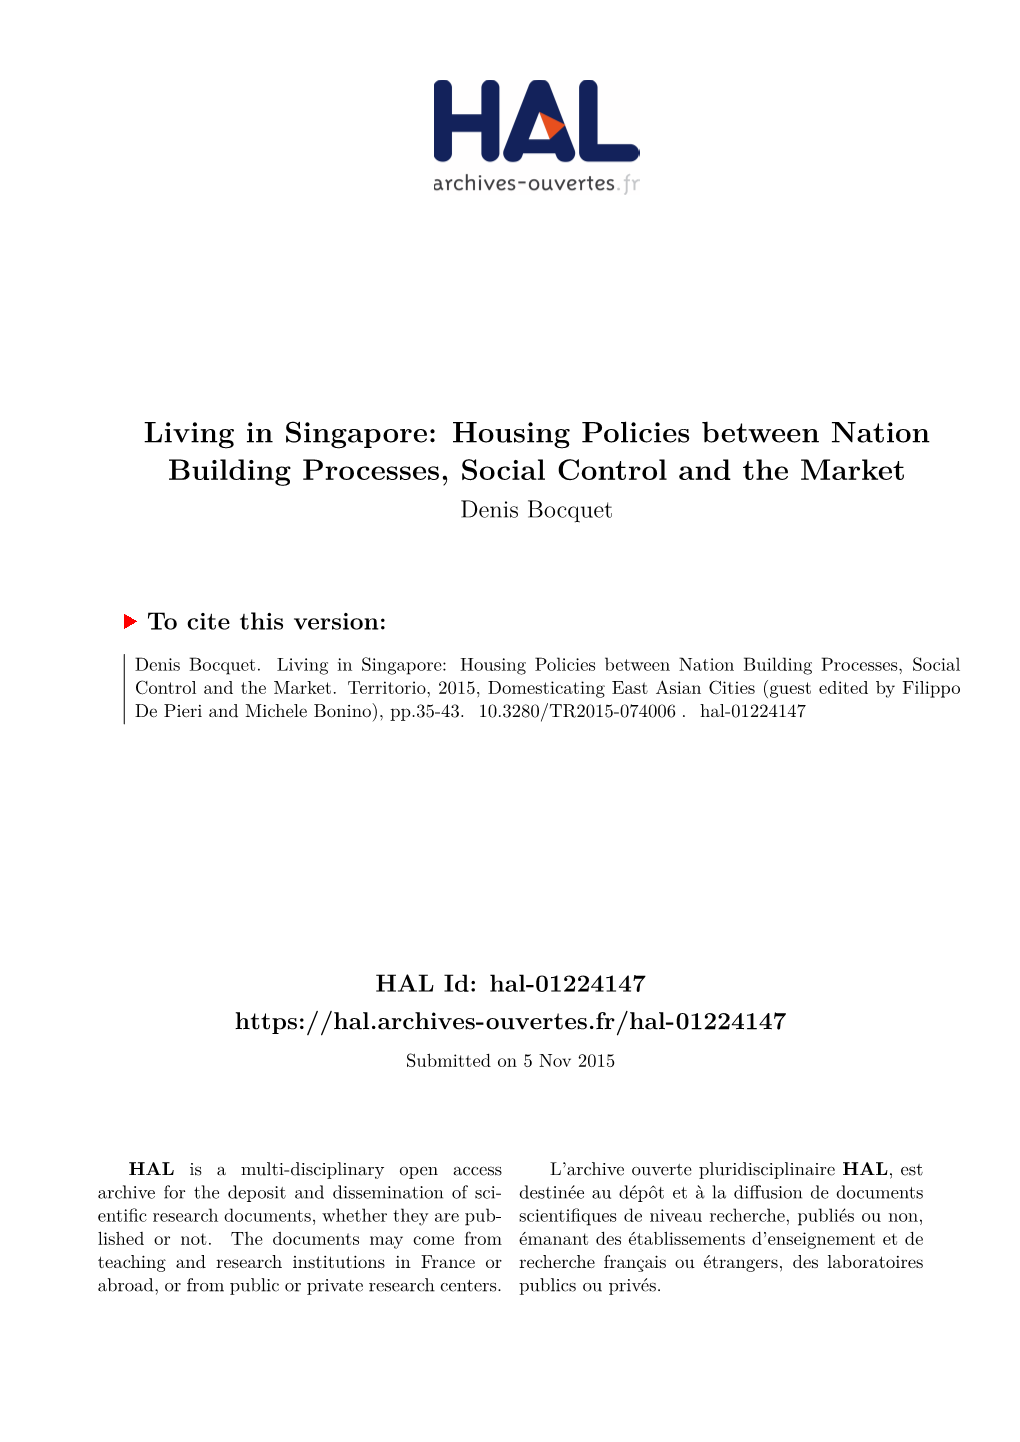 Living in Singapore: Housing Policies Between Nation Building Processes, Social Control and the Market Denis Bocquet